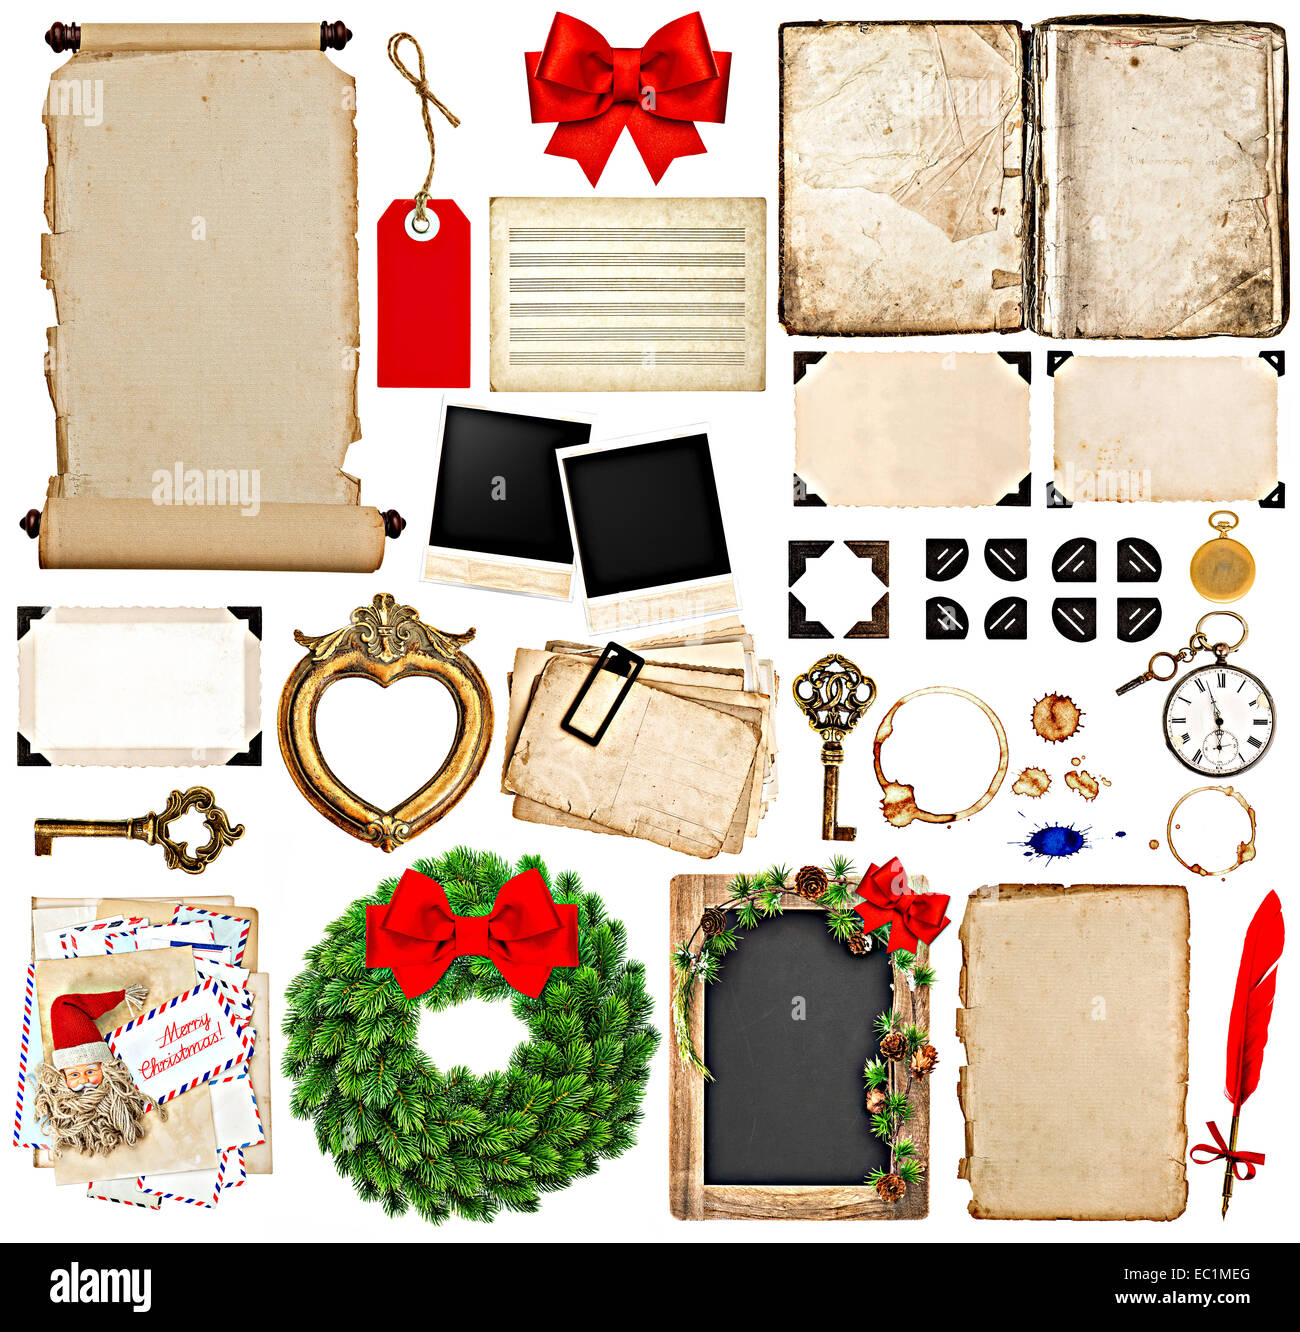 scrapbook elements for christmas holidays greetings. old book pages, paper, scroll, wreath, blackboard, corner and photo frames Stock Photo